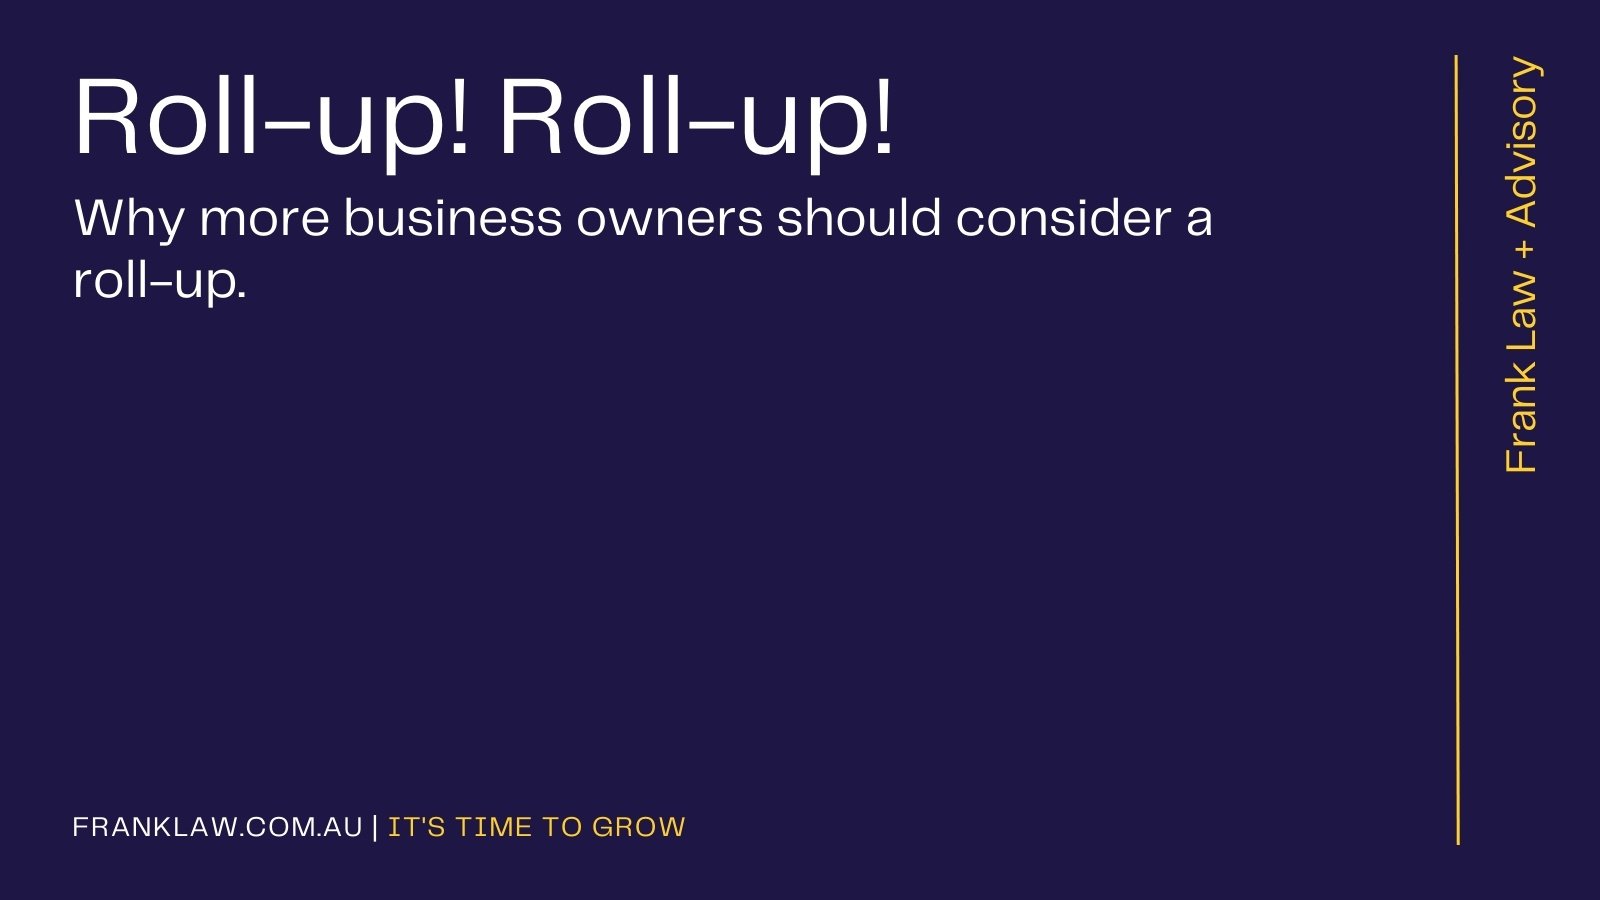 Roll-up! Roll-Up! Why more business owners should consider a roll-up.